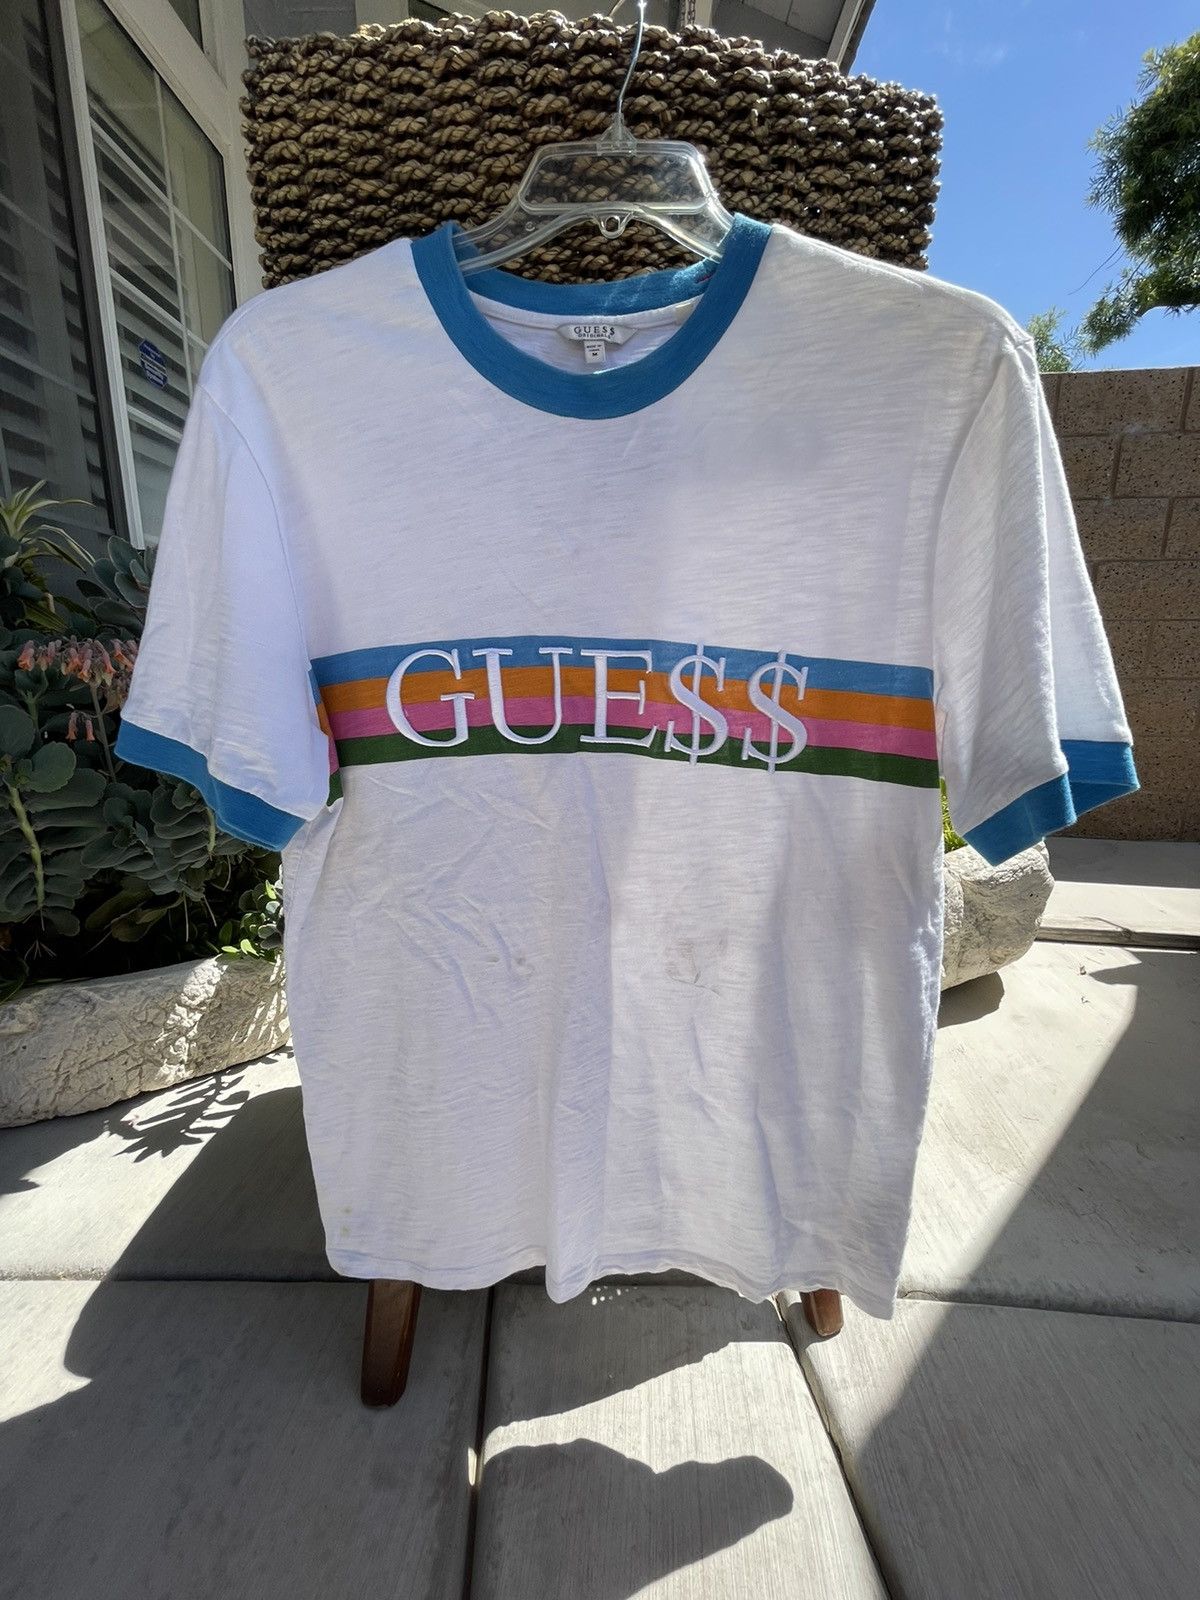 Guess Rainbow Ringer Tee ASAP Rocky x guess Grailed